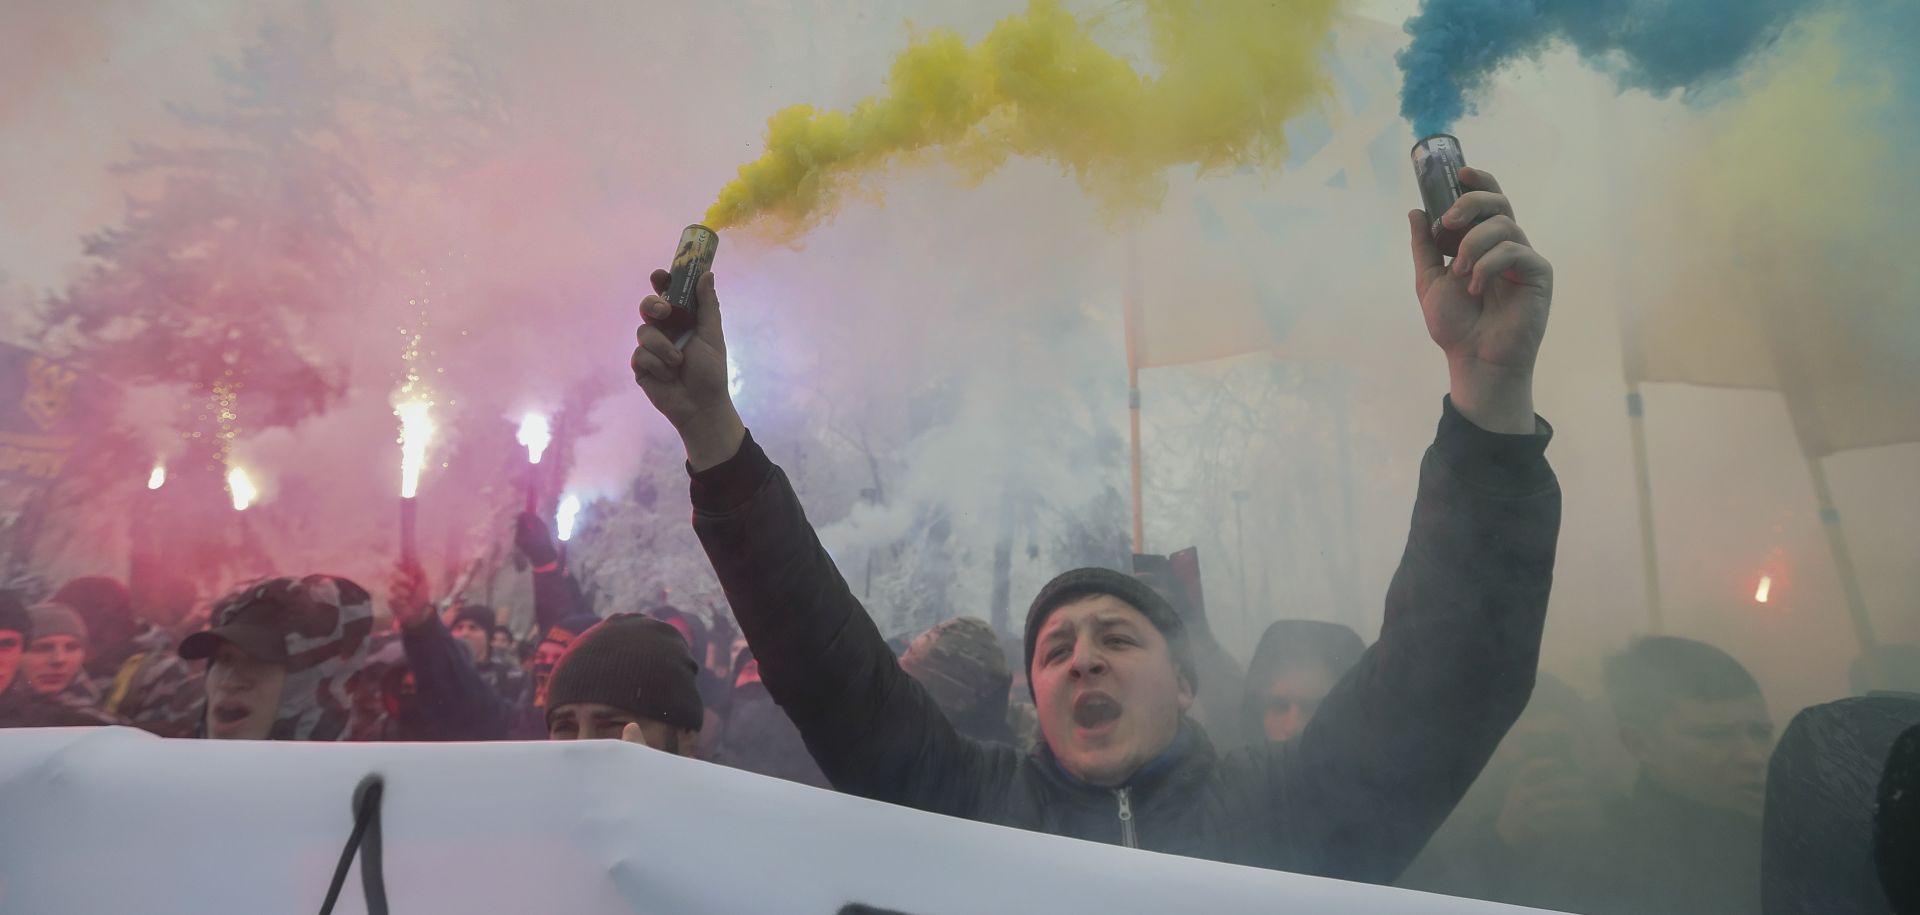 epa07190805 Ukrainian Nationalists burn flares and smoke grenades during their rally in front of Parliament building in Kiev, Ukraine, 26 November 2018 as they demand to break the diplomatic relations with Russia and nationalization of Russian property in Ukraine. The President of Ukraine Petro Poroshenko at a meeting of the National Security and Defense Council on 25 November 2018 announced the decision to introduce martial law in Ukraine and to appeal to the Parliament to consider the move at an extraordinary meeting. It is about the introduction of martial law for a period of 60 days. The Ukrainian Parliament will convene for an extraordinary meeting at evening 26 November 2018. Russia has seized three Ukrainian vessels amid their leaving the Kerch Strait on 25 November 2018. The two small-sized 'Berdiansk' and 'Nikopol' armored artillery boats have come under enemy fire and are now dead in the water. The 'Yany Kapu' tugboat has forcibly been stopped. The vessels have been captured by special forces of the Russian Federation, the press service of Ukraine's Navy said on Facebook on Sunday evening.  EPA/SERGEY DOLZHENKO